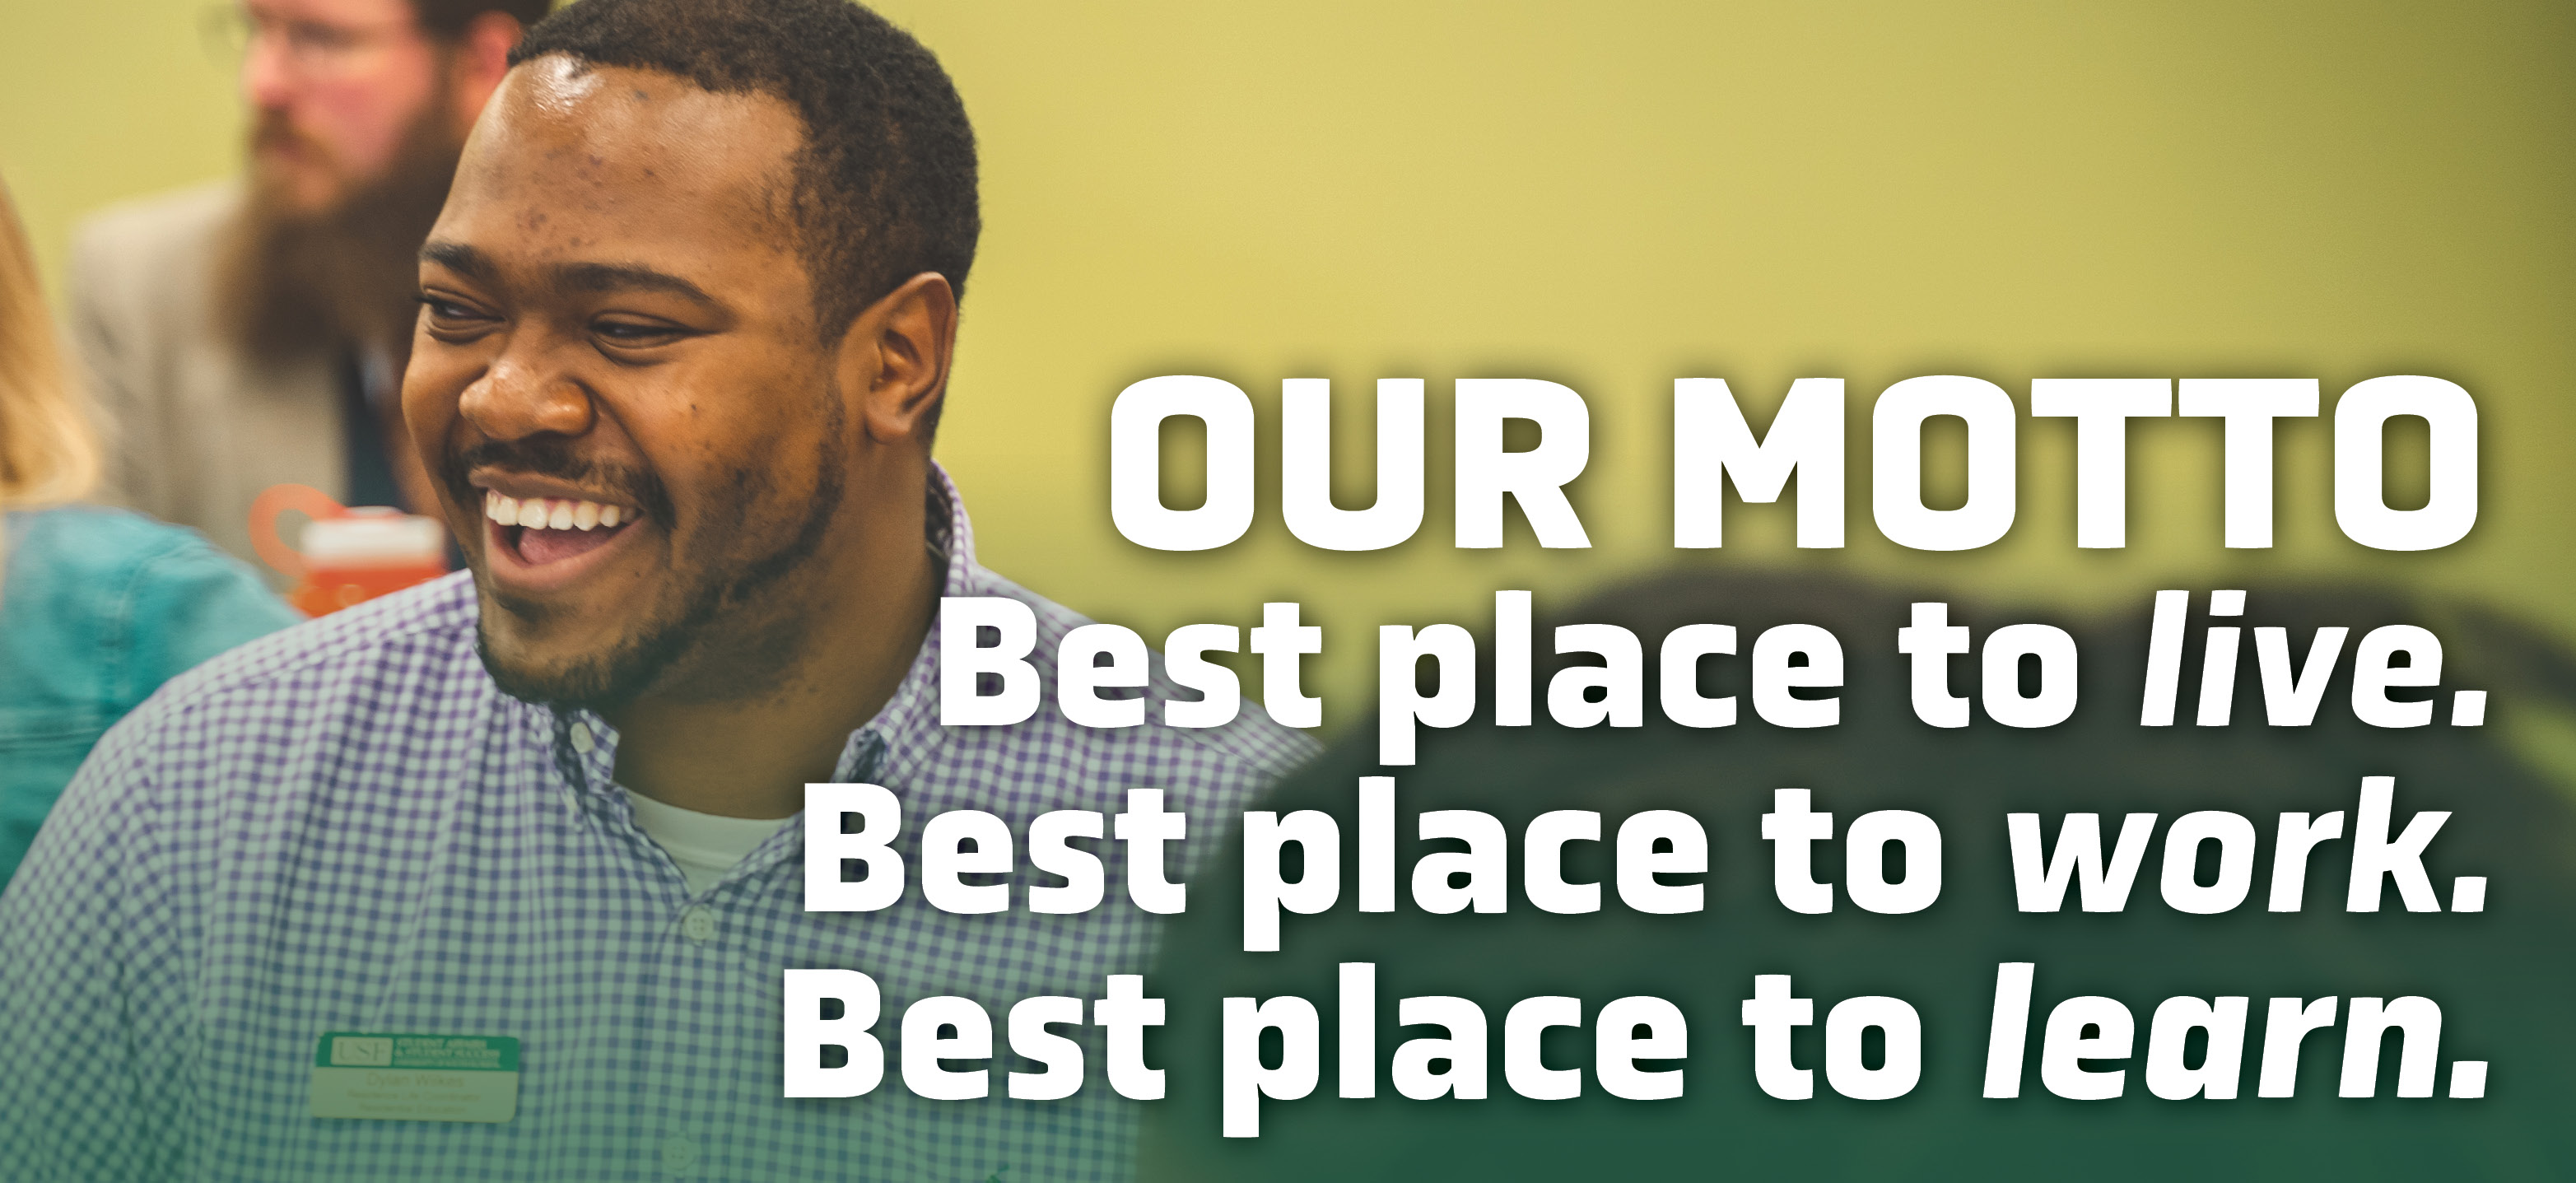 Our Motto: Best place to live. Best place to work. Best place to learn.